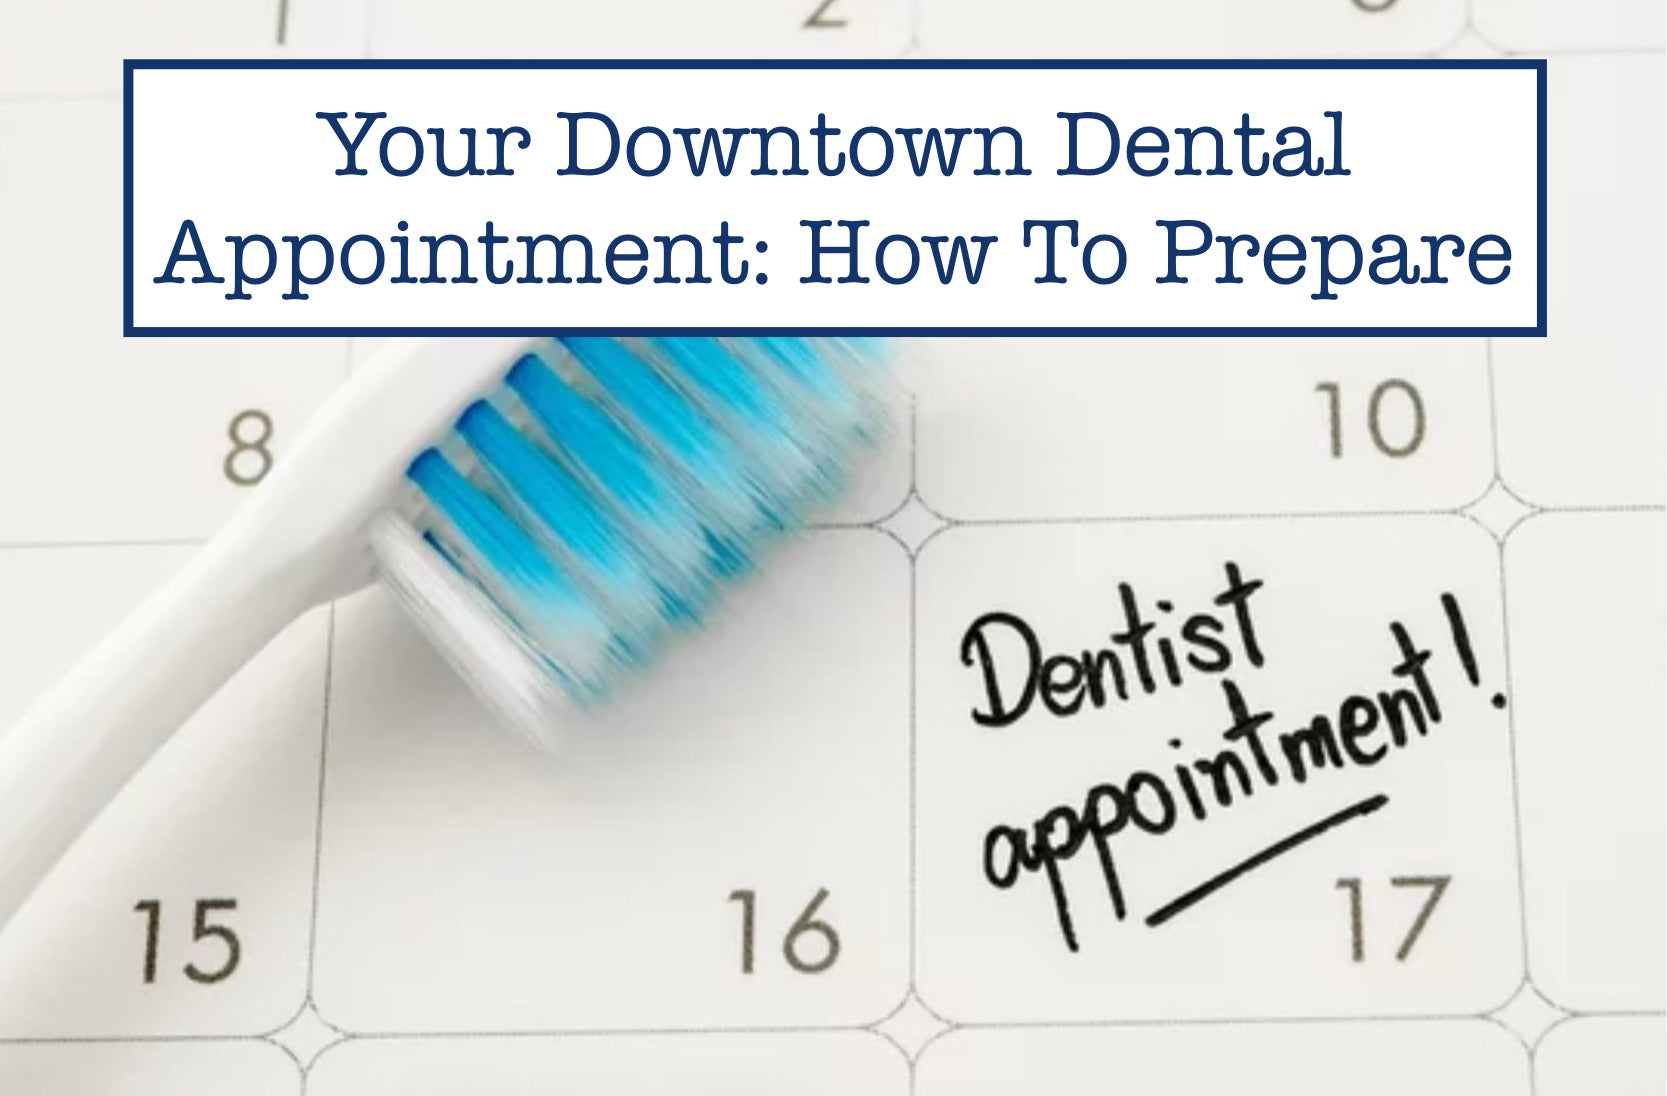 Your Downtown Dental Appointment: How To Prepare